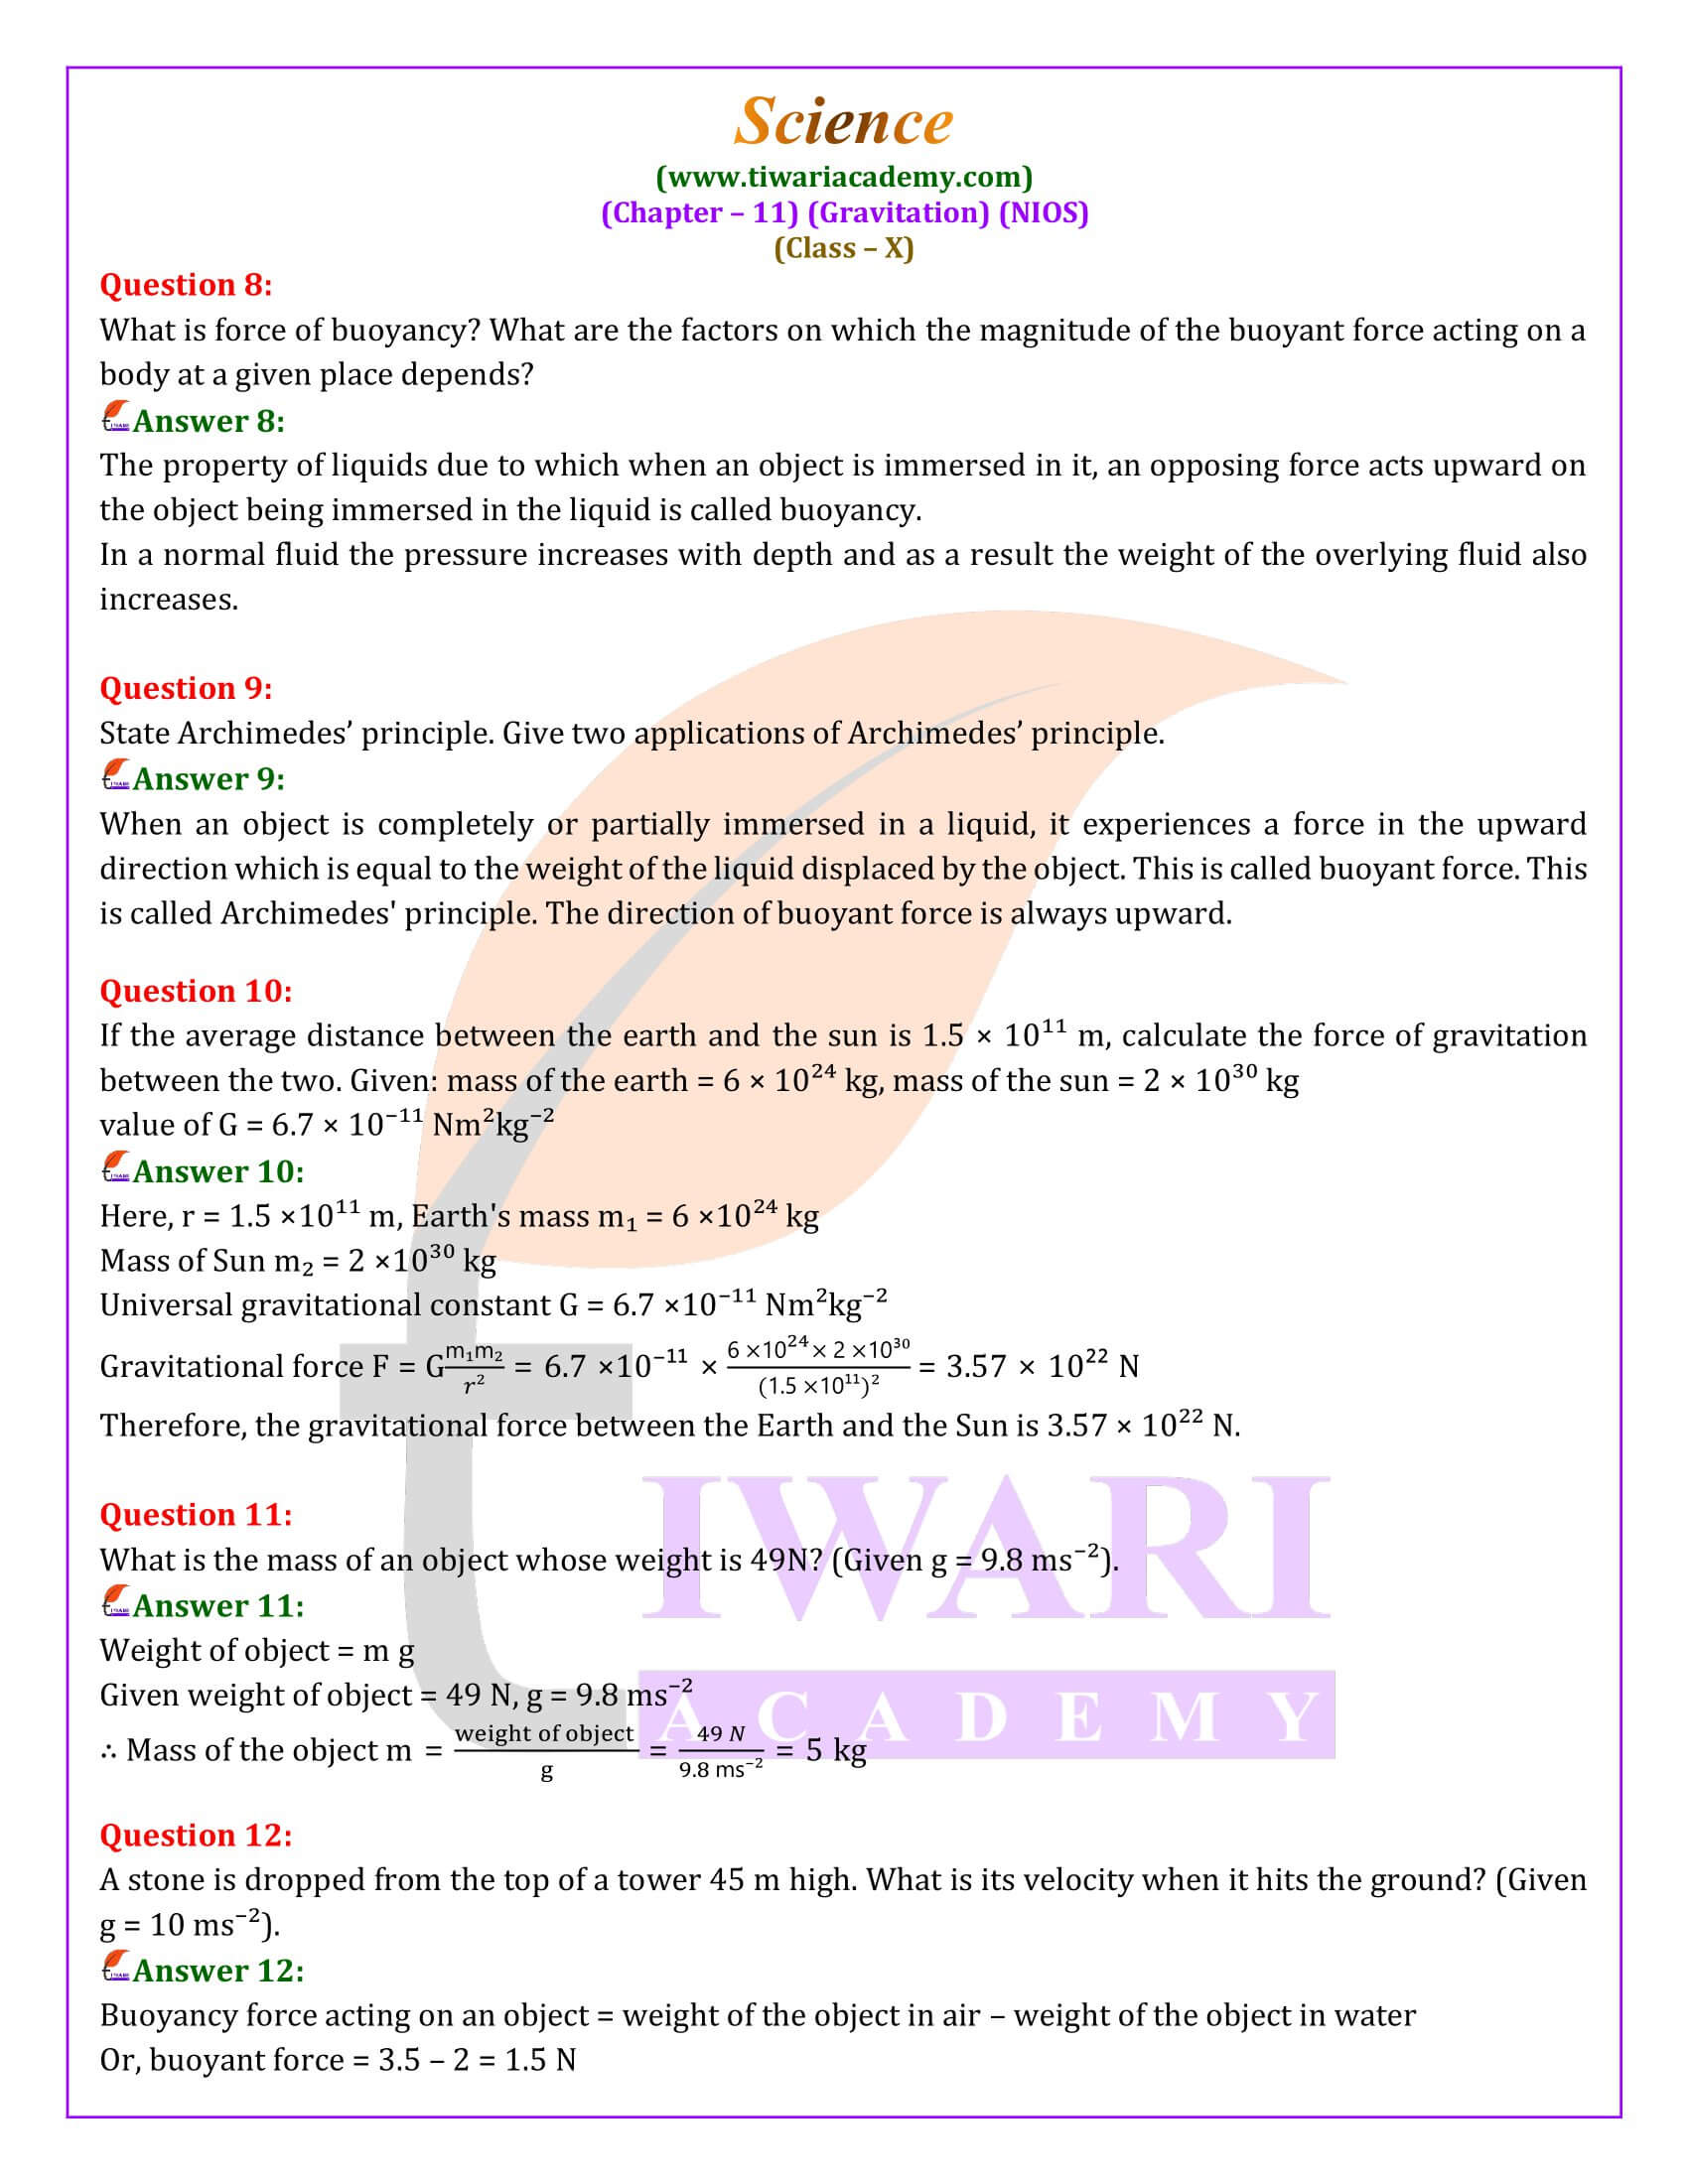 NIOS Class 10 Science Chapter 11 Answers